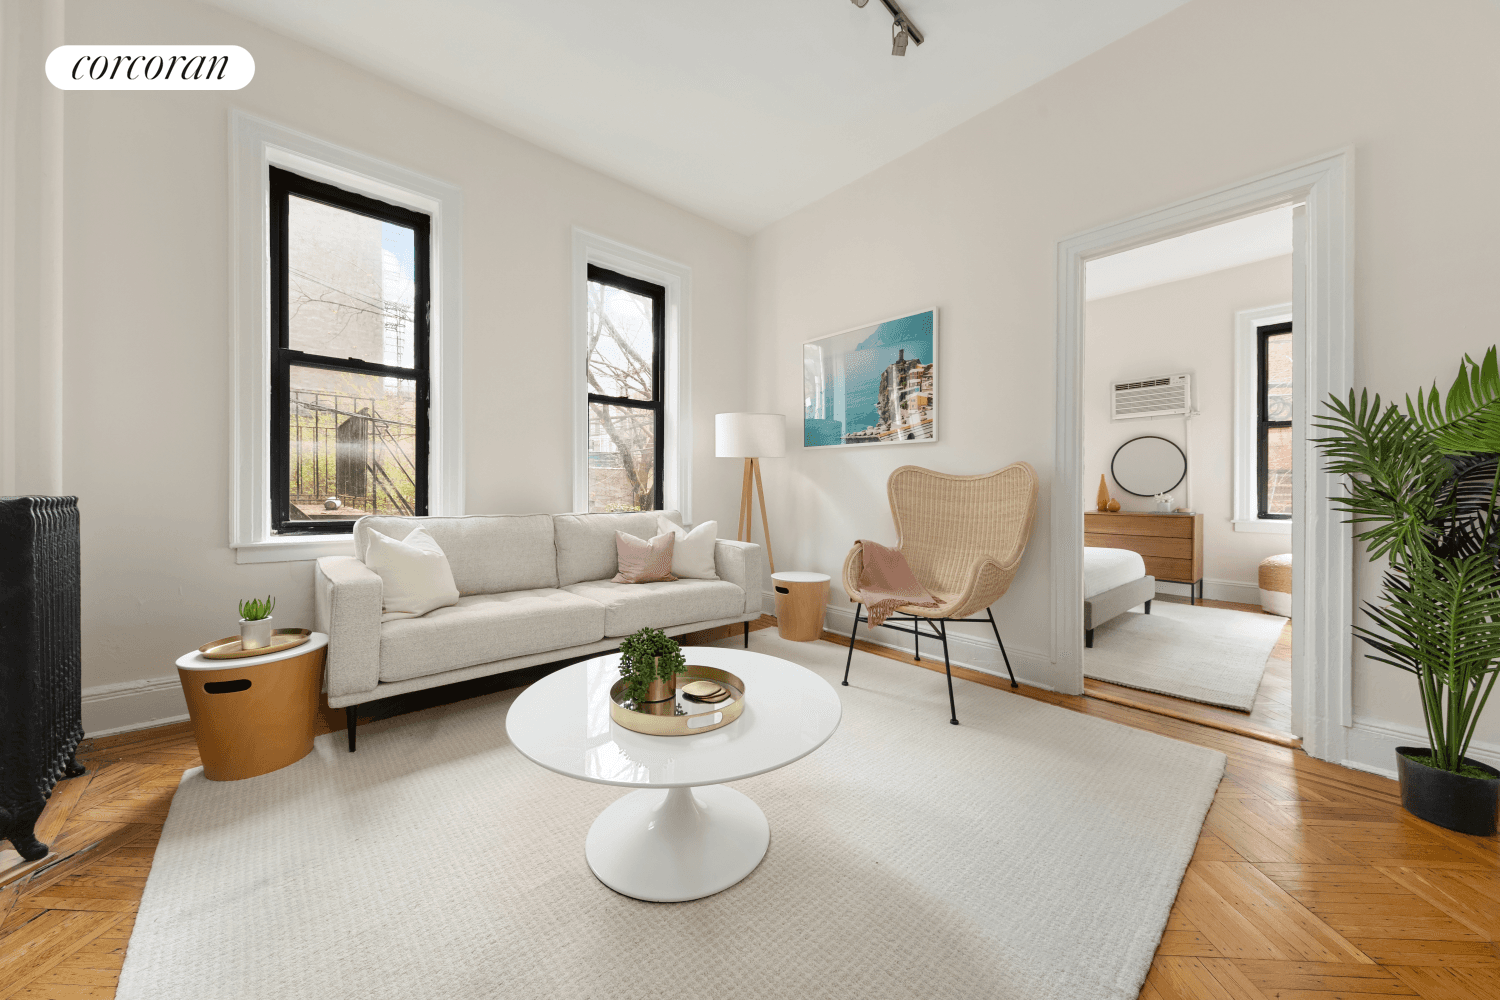 Residence 2 at 368 State Street is a charming one bedroom with private backyard, located on a picturesque tree lined block in prime Boerum Hill.